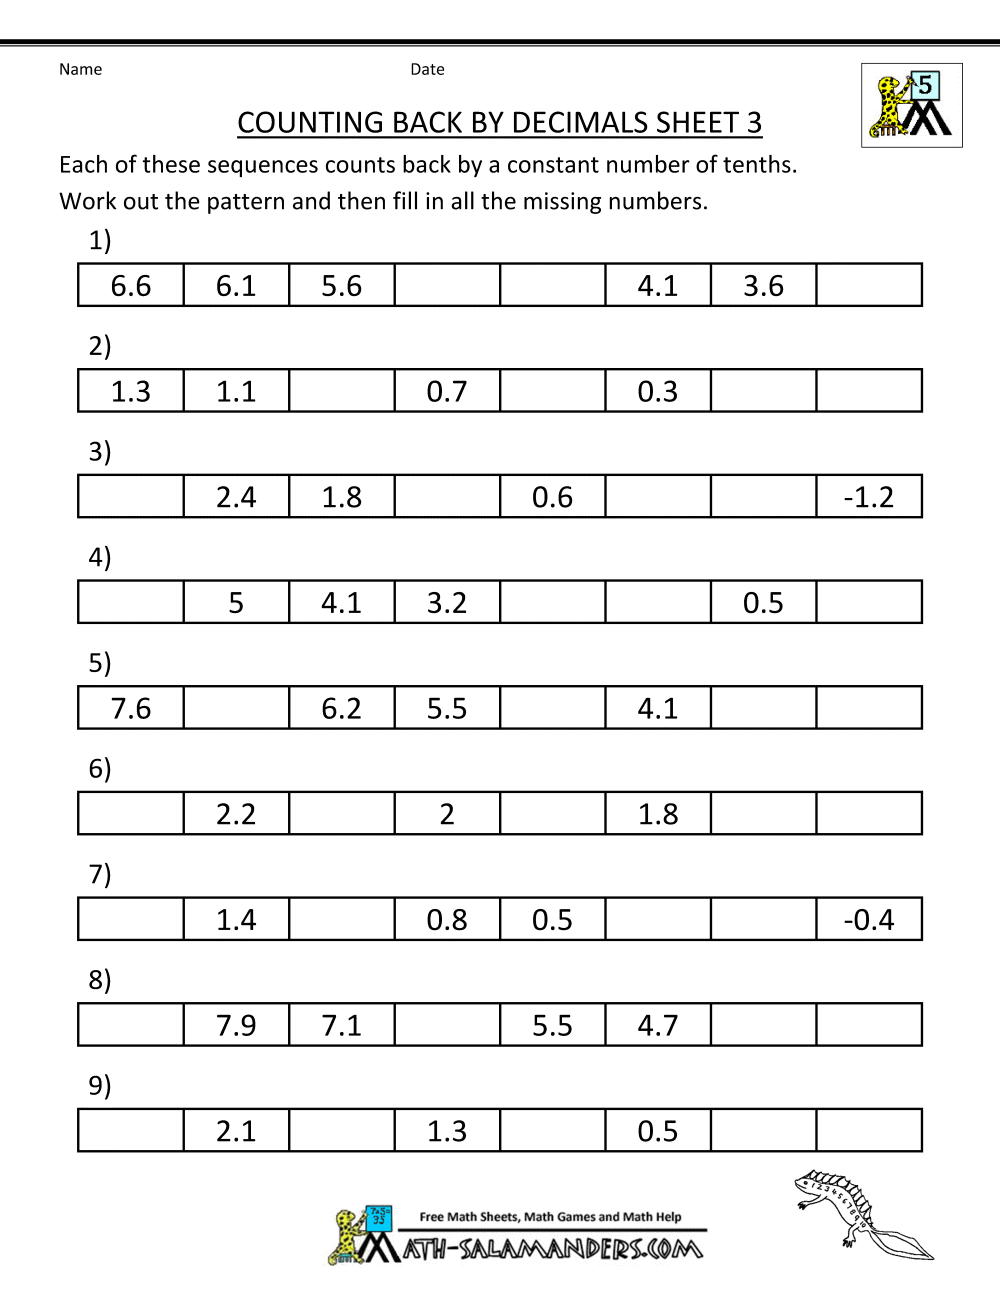 decimals  sequences Sheet 3 Answers missing numbers Sheet number by Counting back 3 worksheets